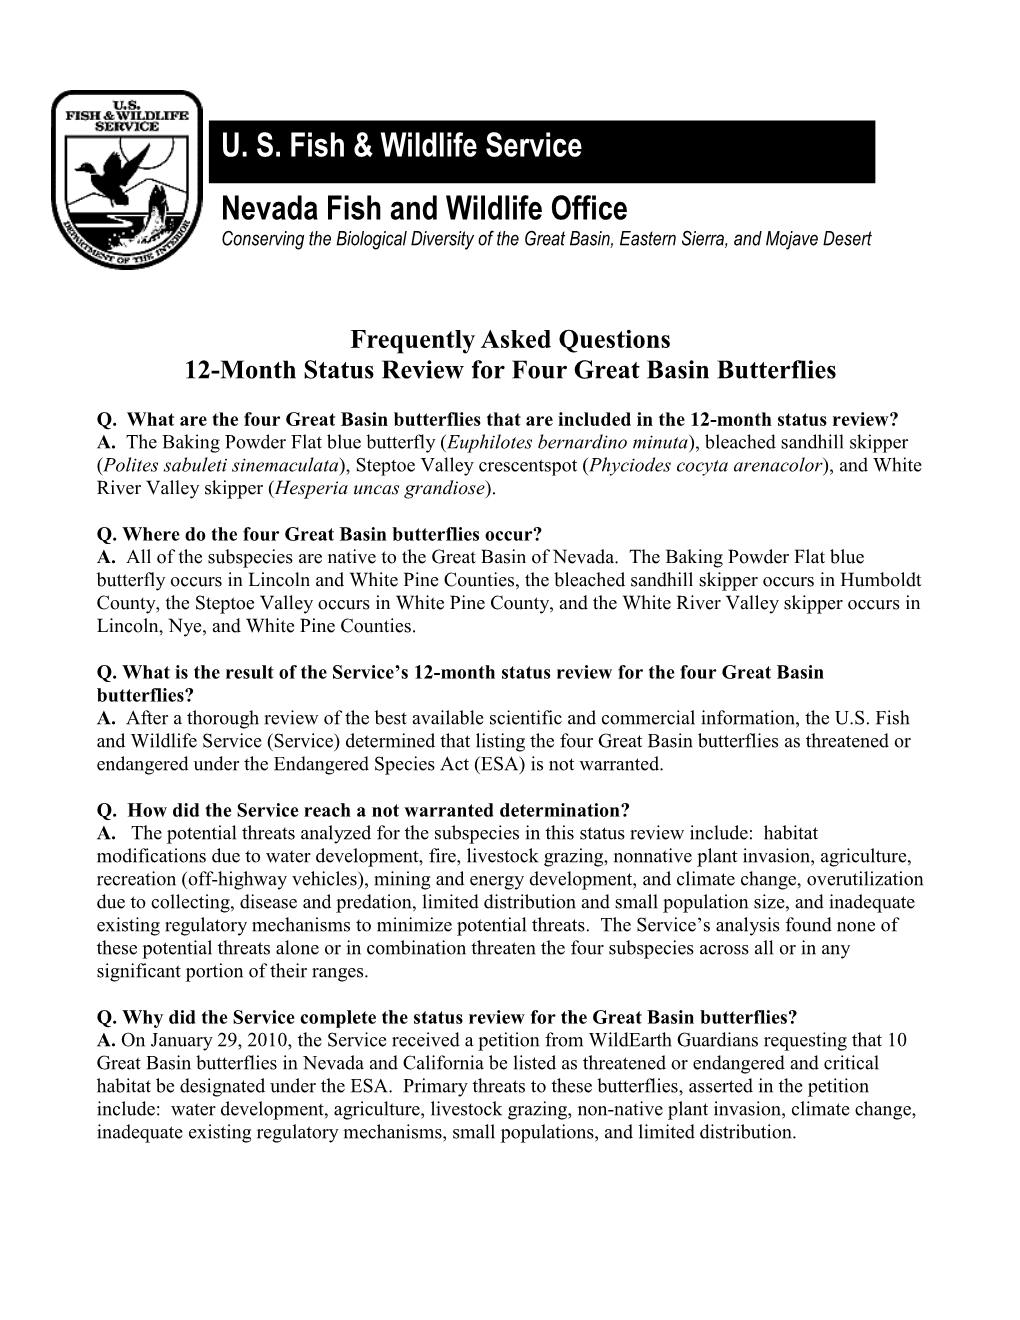 Nevada Fish and Wildlife Office Conserving the Biological Diversity of the Great Basin, Eastern Sierra, and Mojave Desert